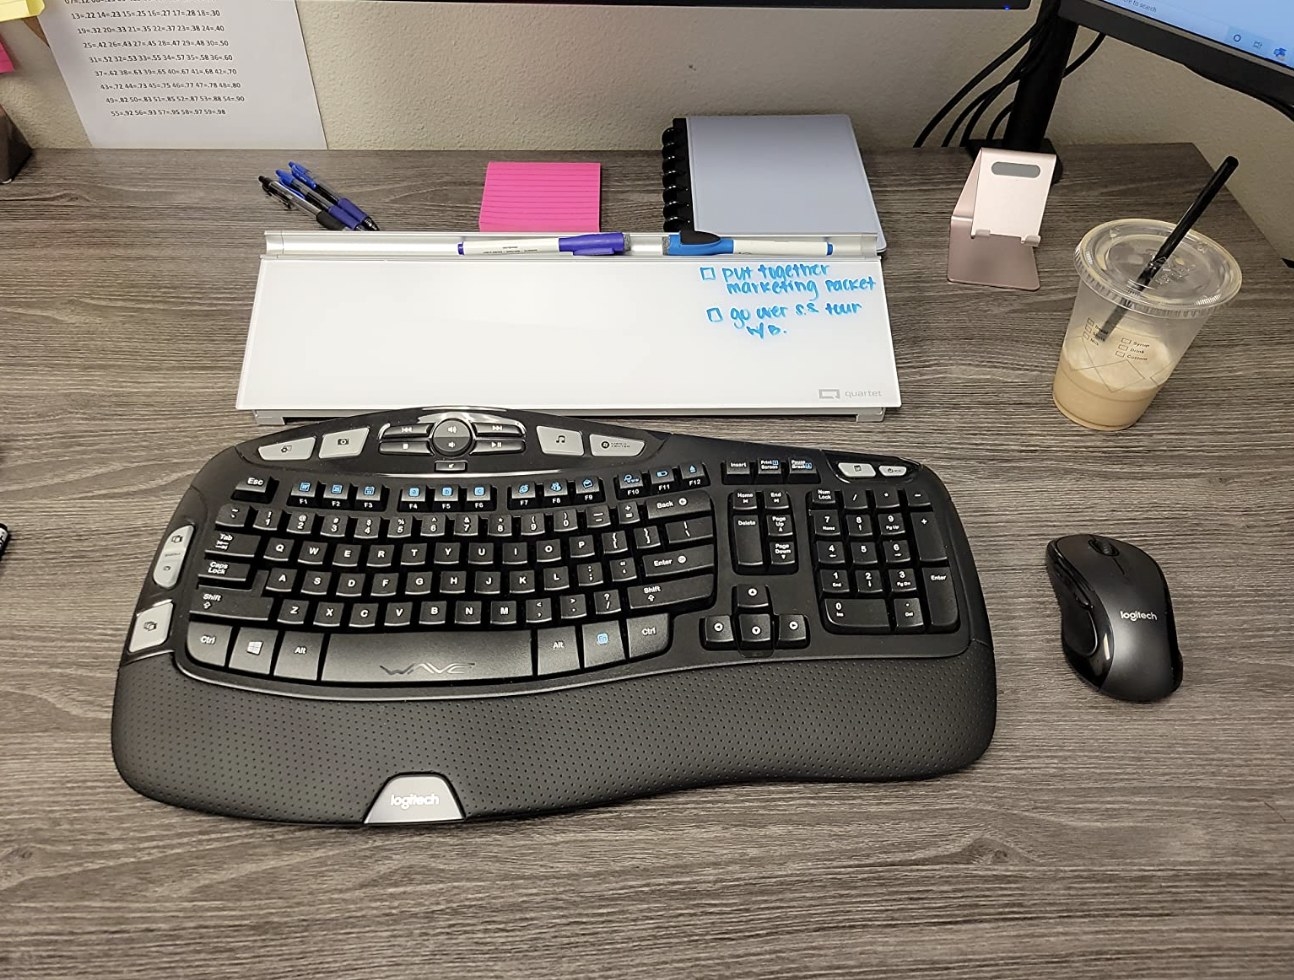 The white board next to a keyboard